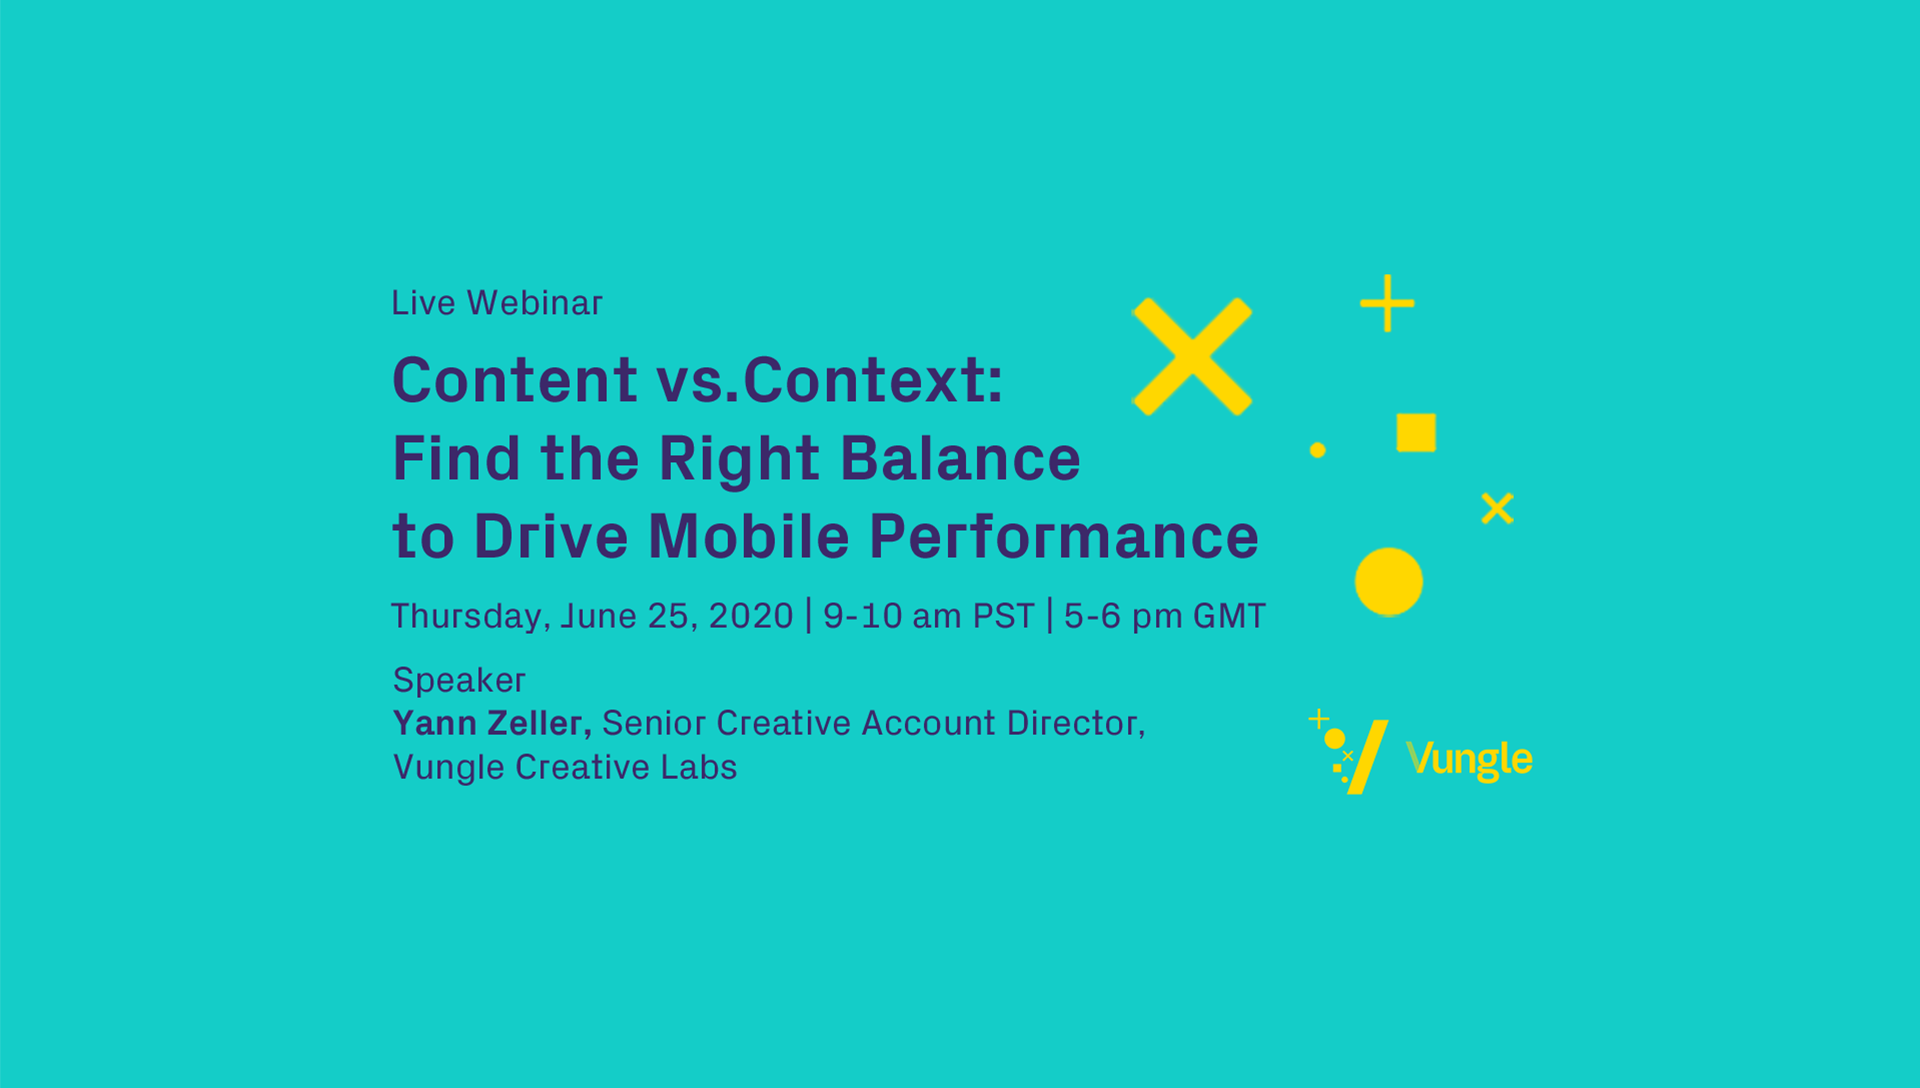 Content vs. Context: Find the Right Balance to Drive Mobile Performance